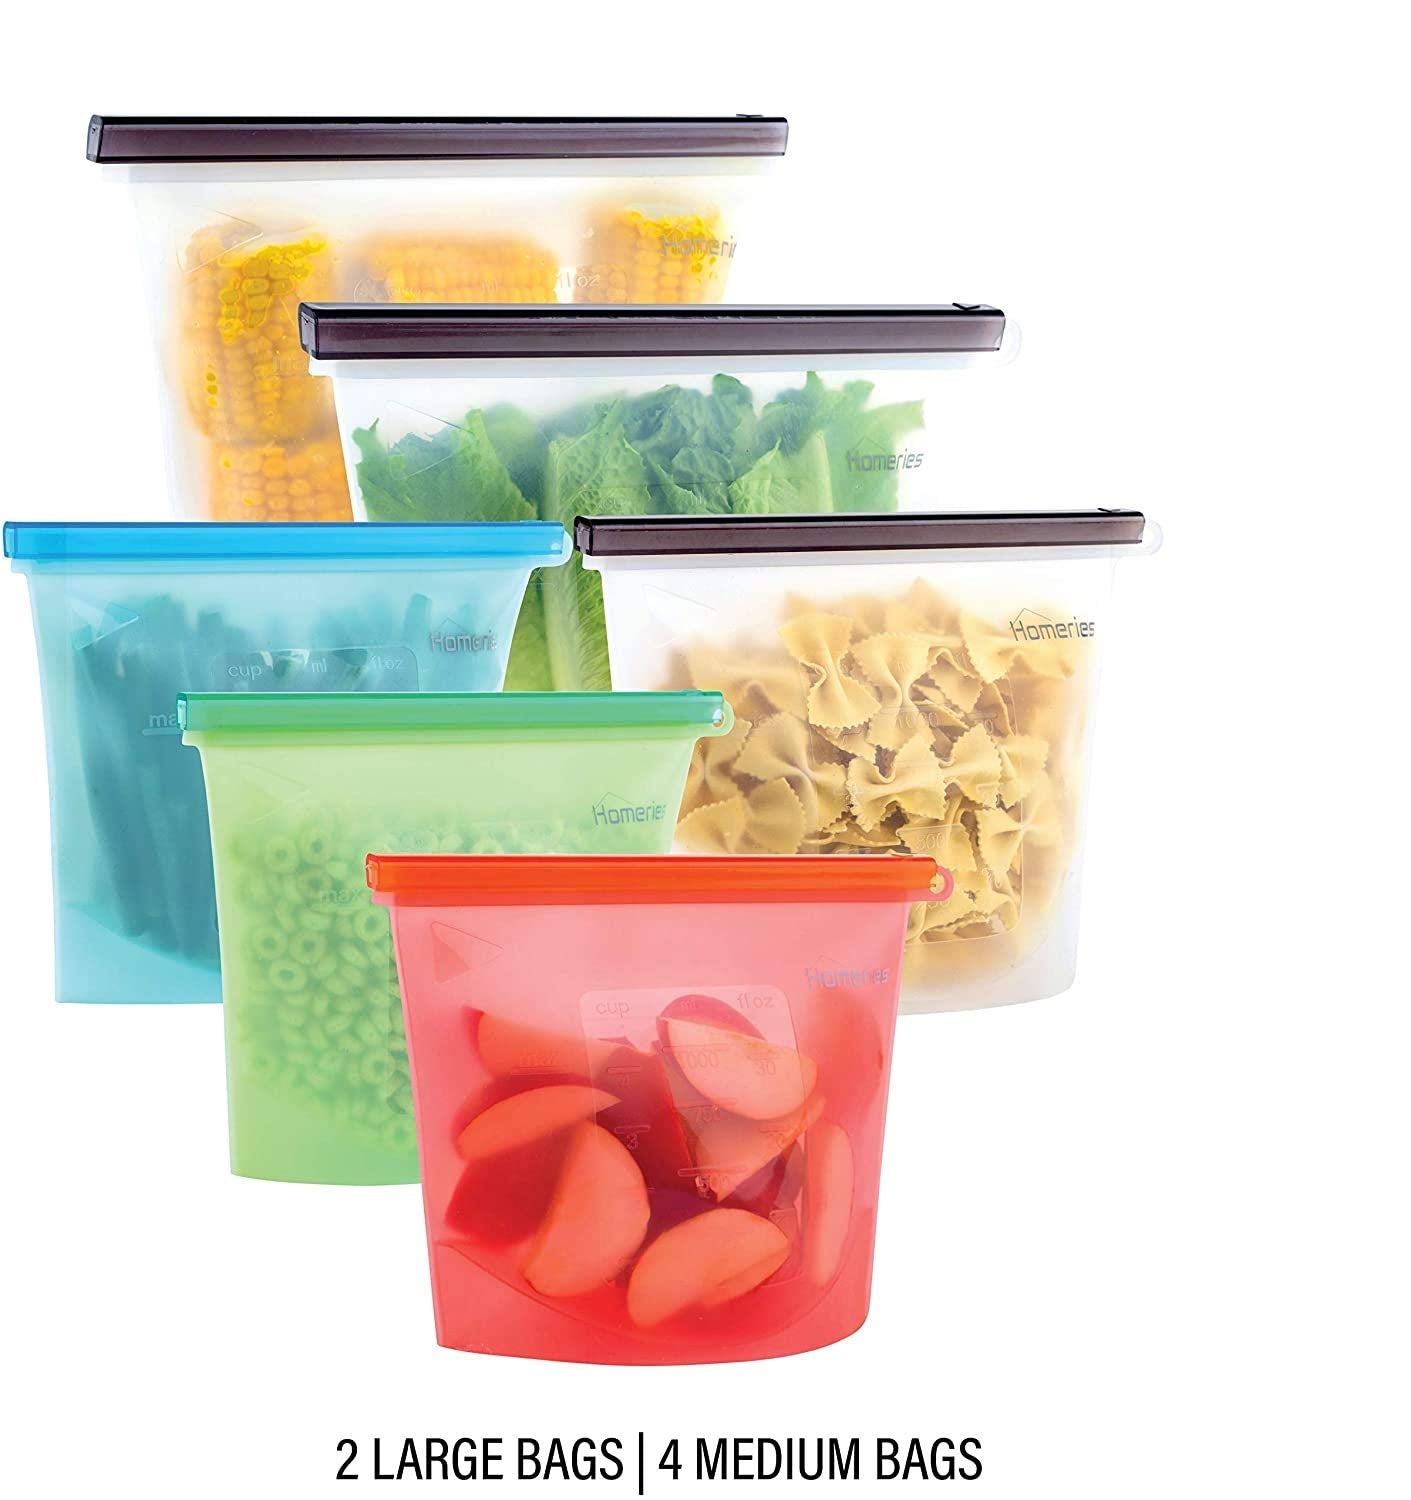 Reusable Silicone Food Bag, Freezer Storage Containers